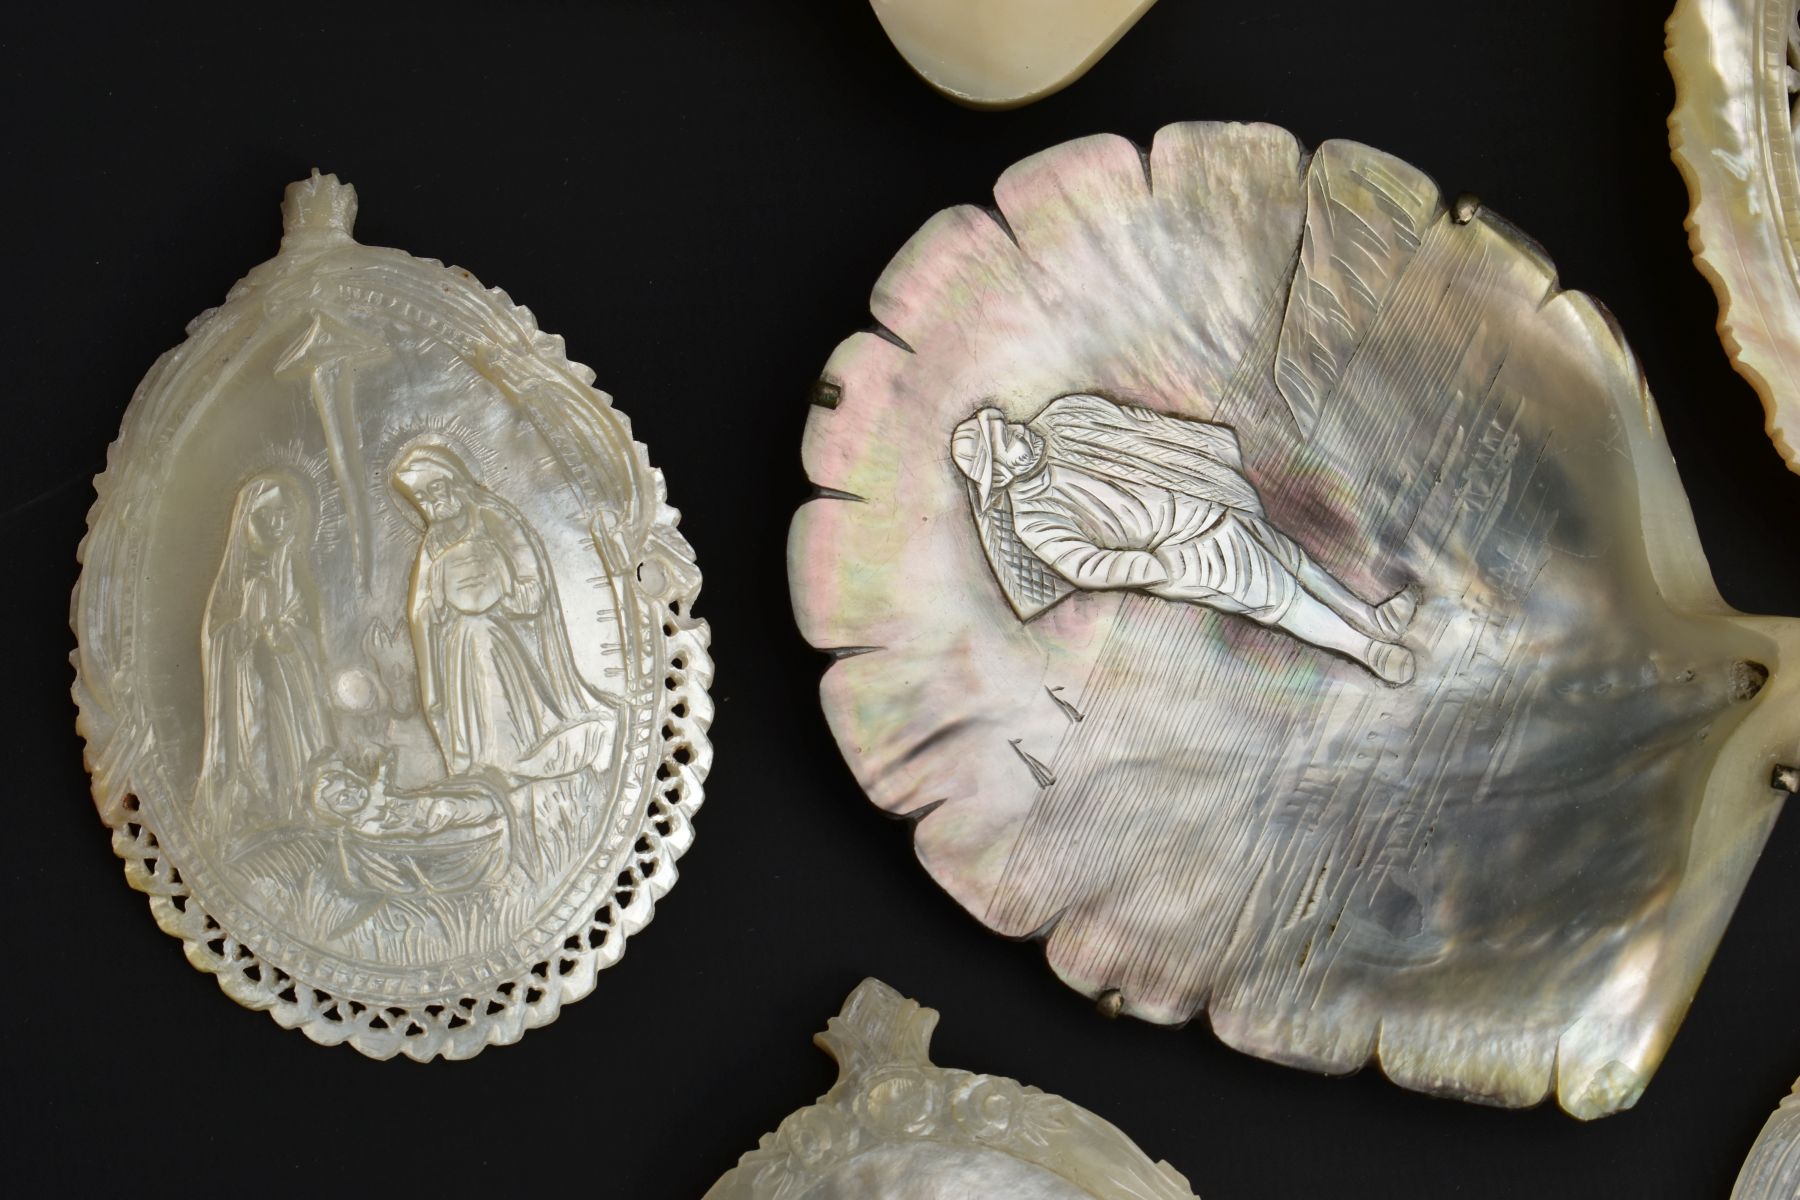 SEVEN MOTHER OF PEARL SHELL CARVINGS OF BIBLICAL SCENES, including the Nativity, the crucifixion and - Image 6 of 17